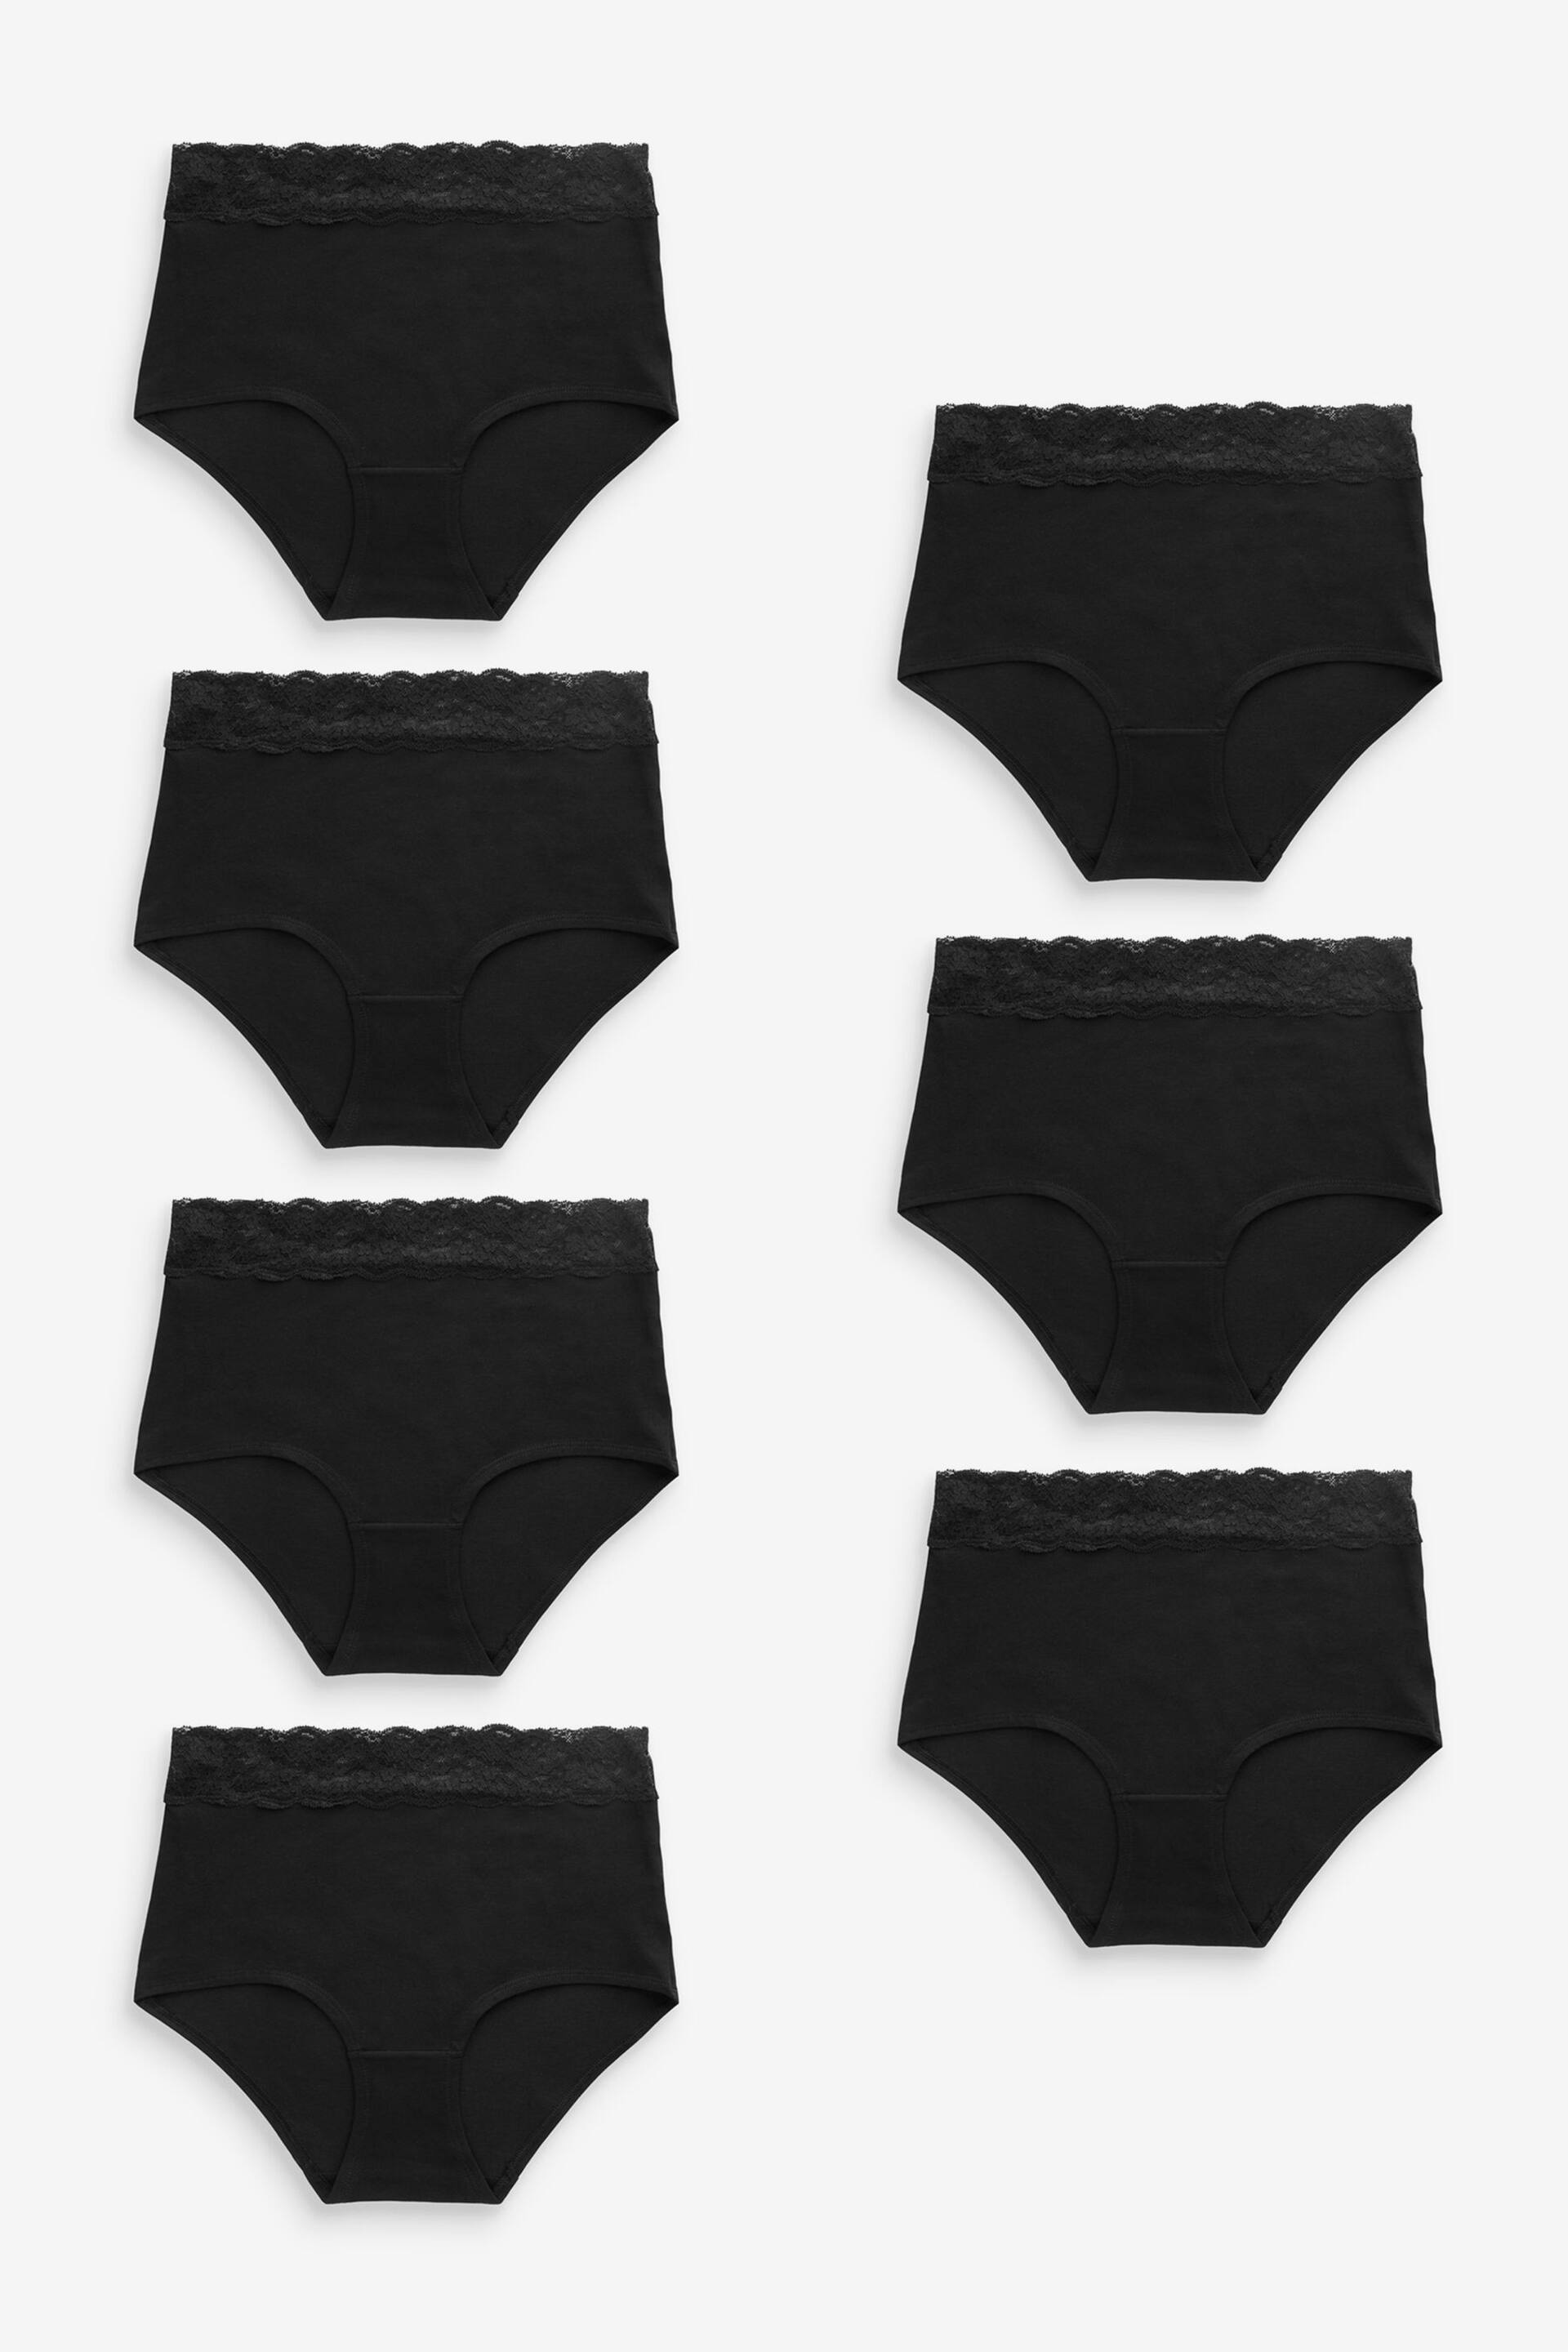 Black Full Brief Cotton and Lace Knickers 7 Pack - Image 4 of 5